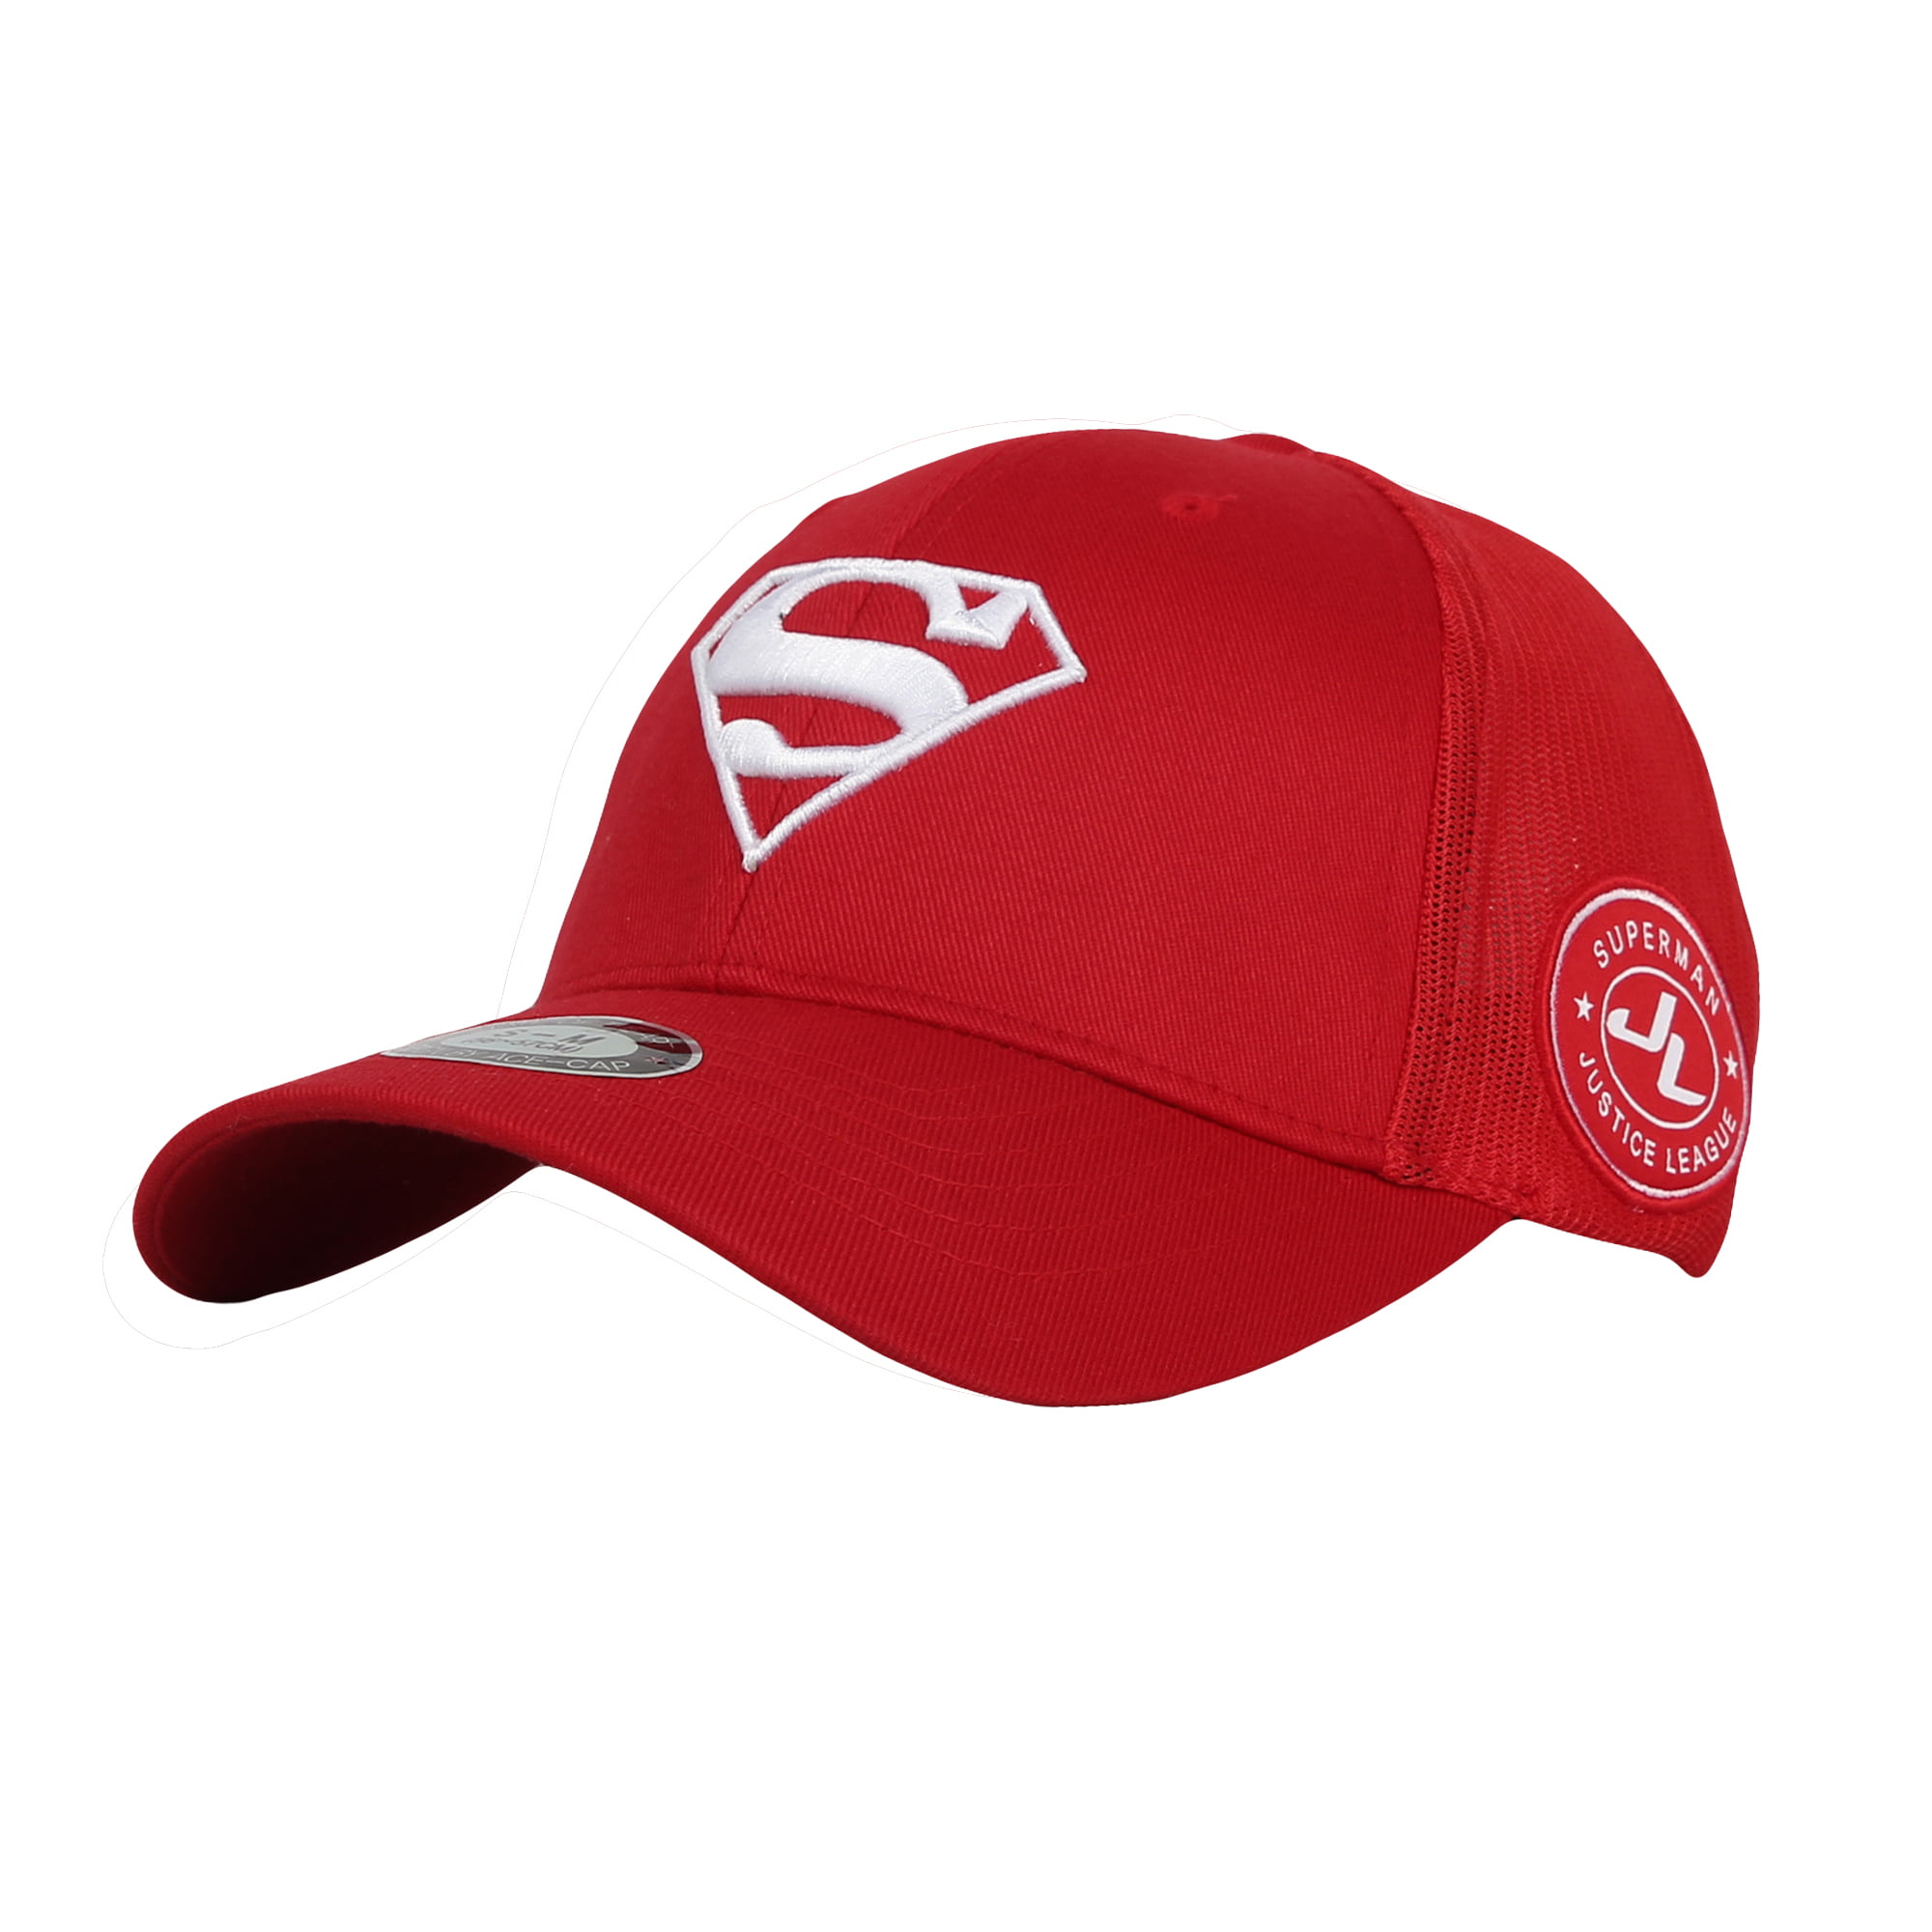 Officially Licensed Superman Shield Embroidered Adjustable Size Snapback Cap